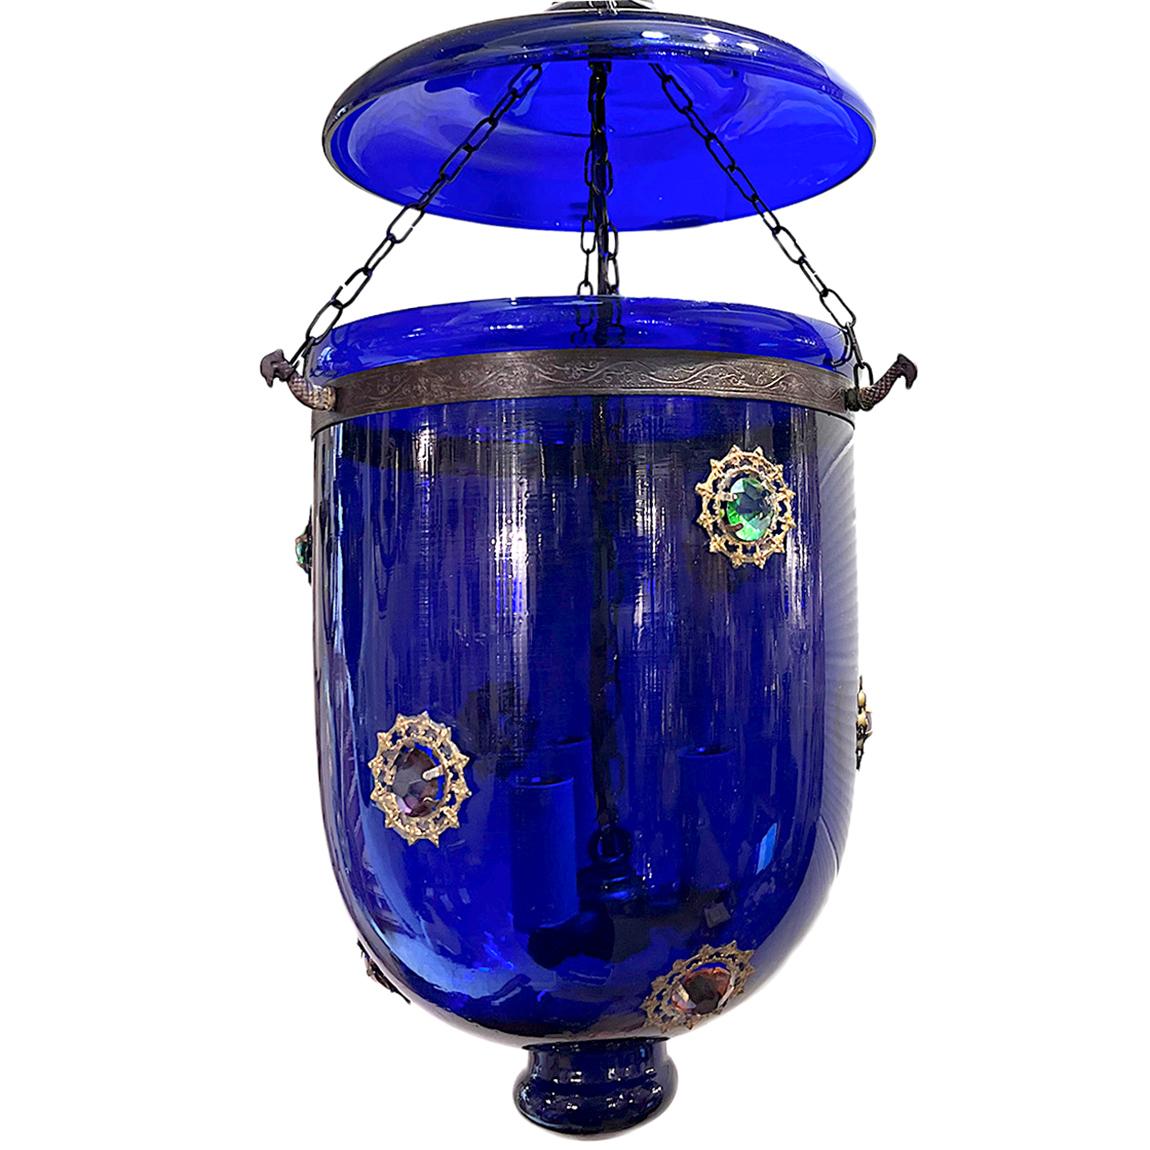 A circa 1950's Anglo Indian blue glass lantern with insert crystals.

Measurements:
Diameter: 10